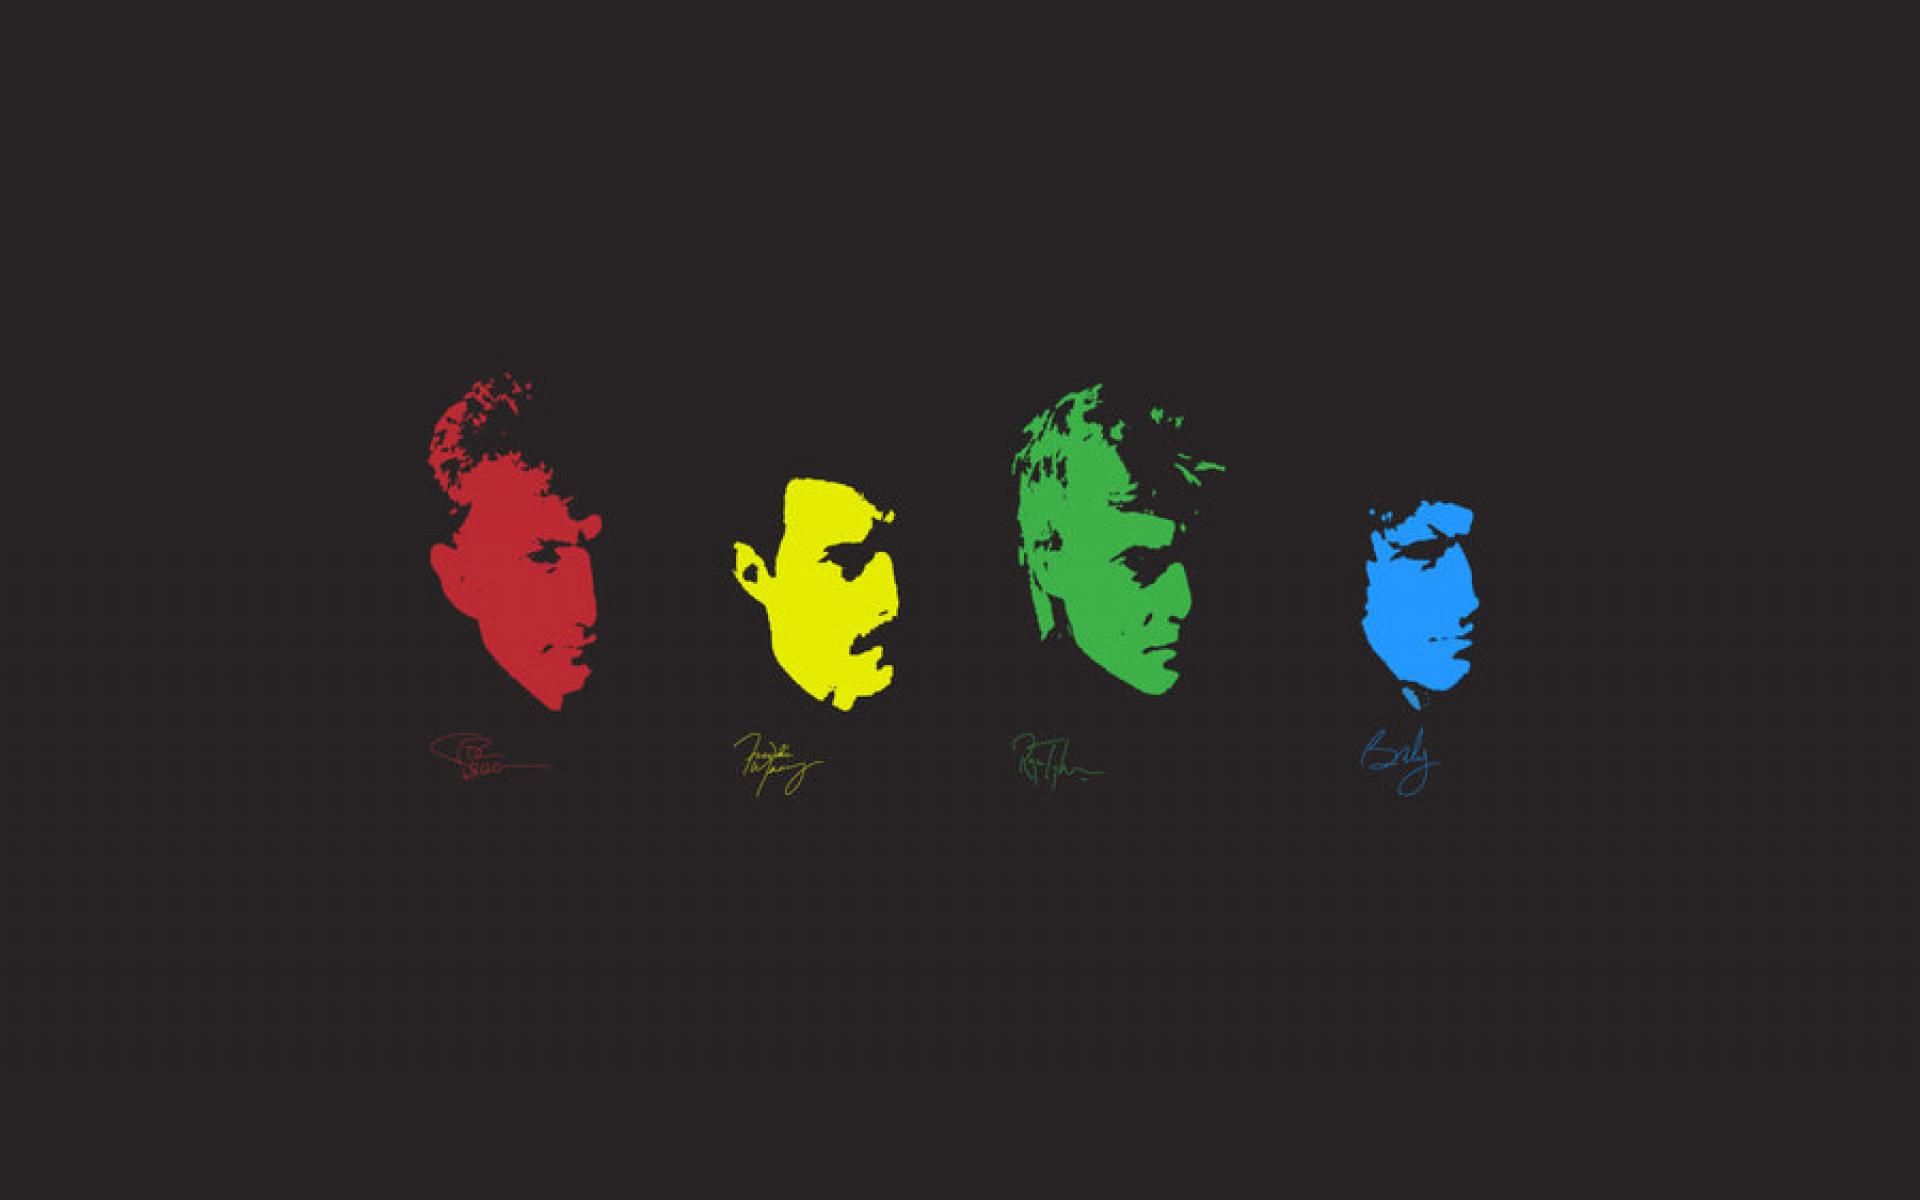 Queen The Band Wallpapers - Wallpaper Cave.